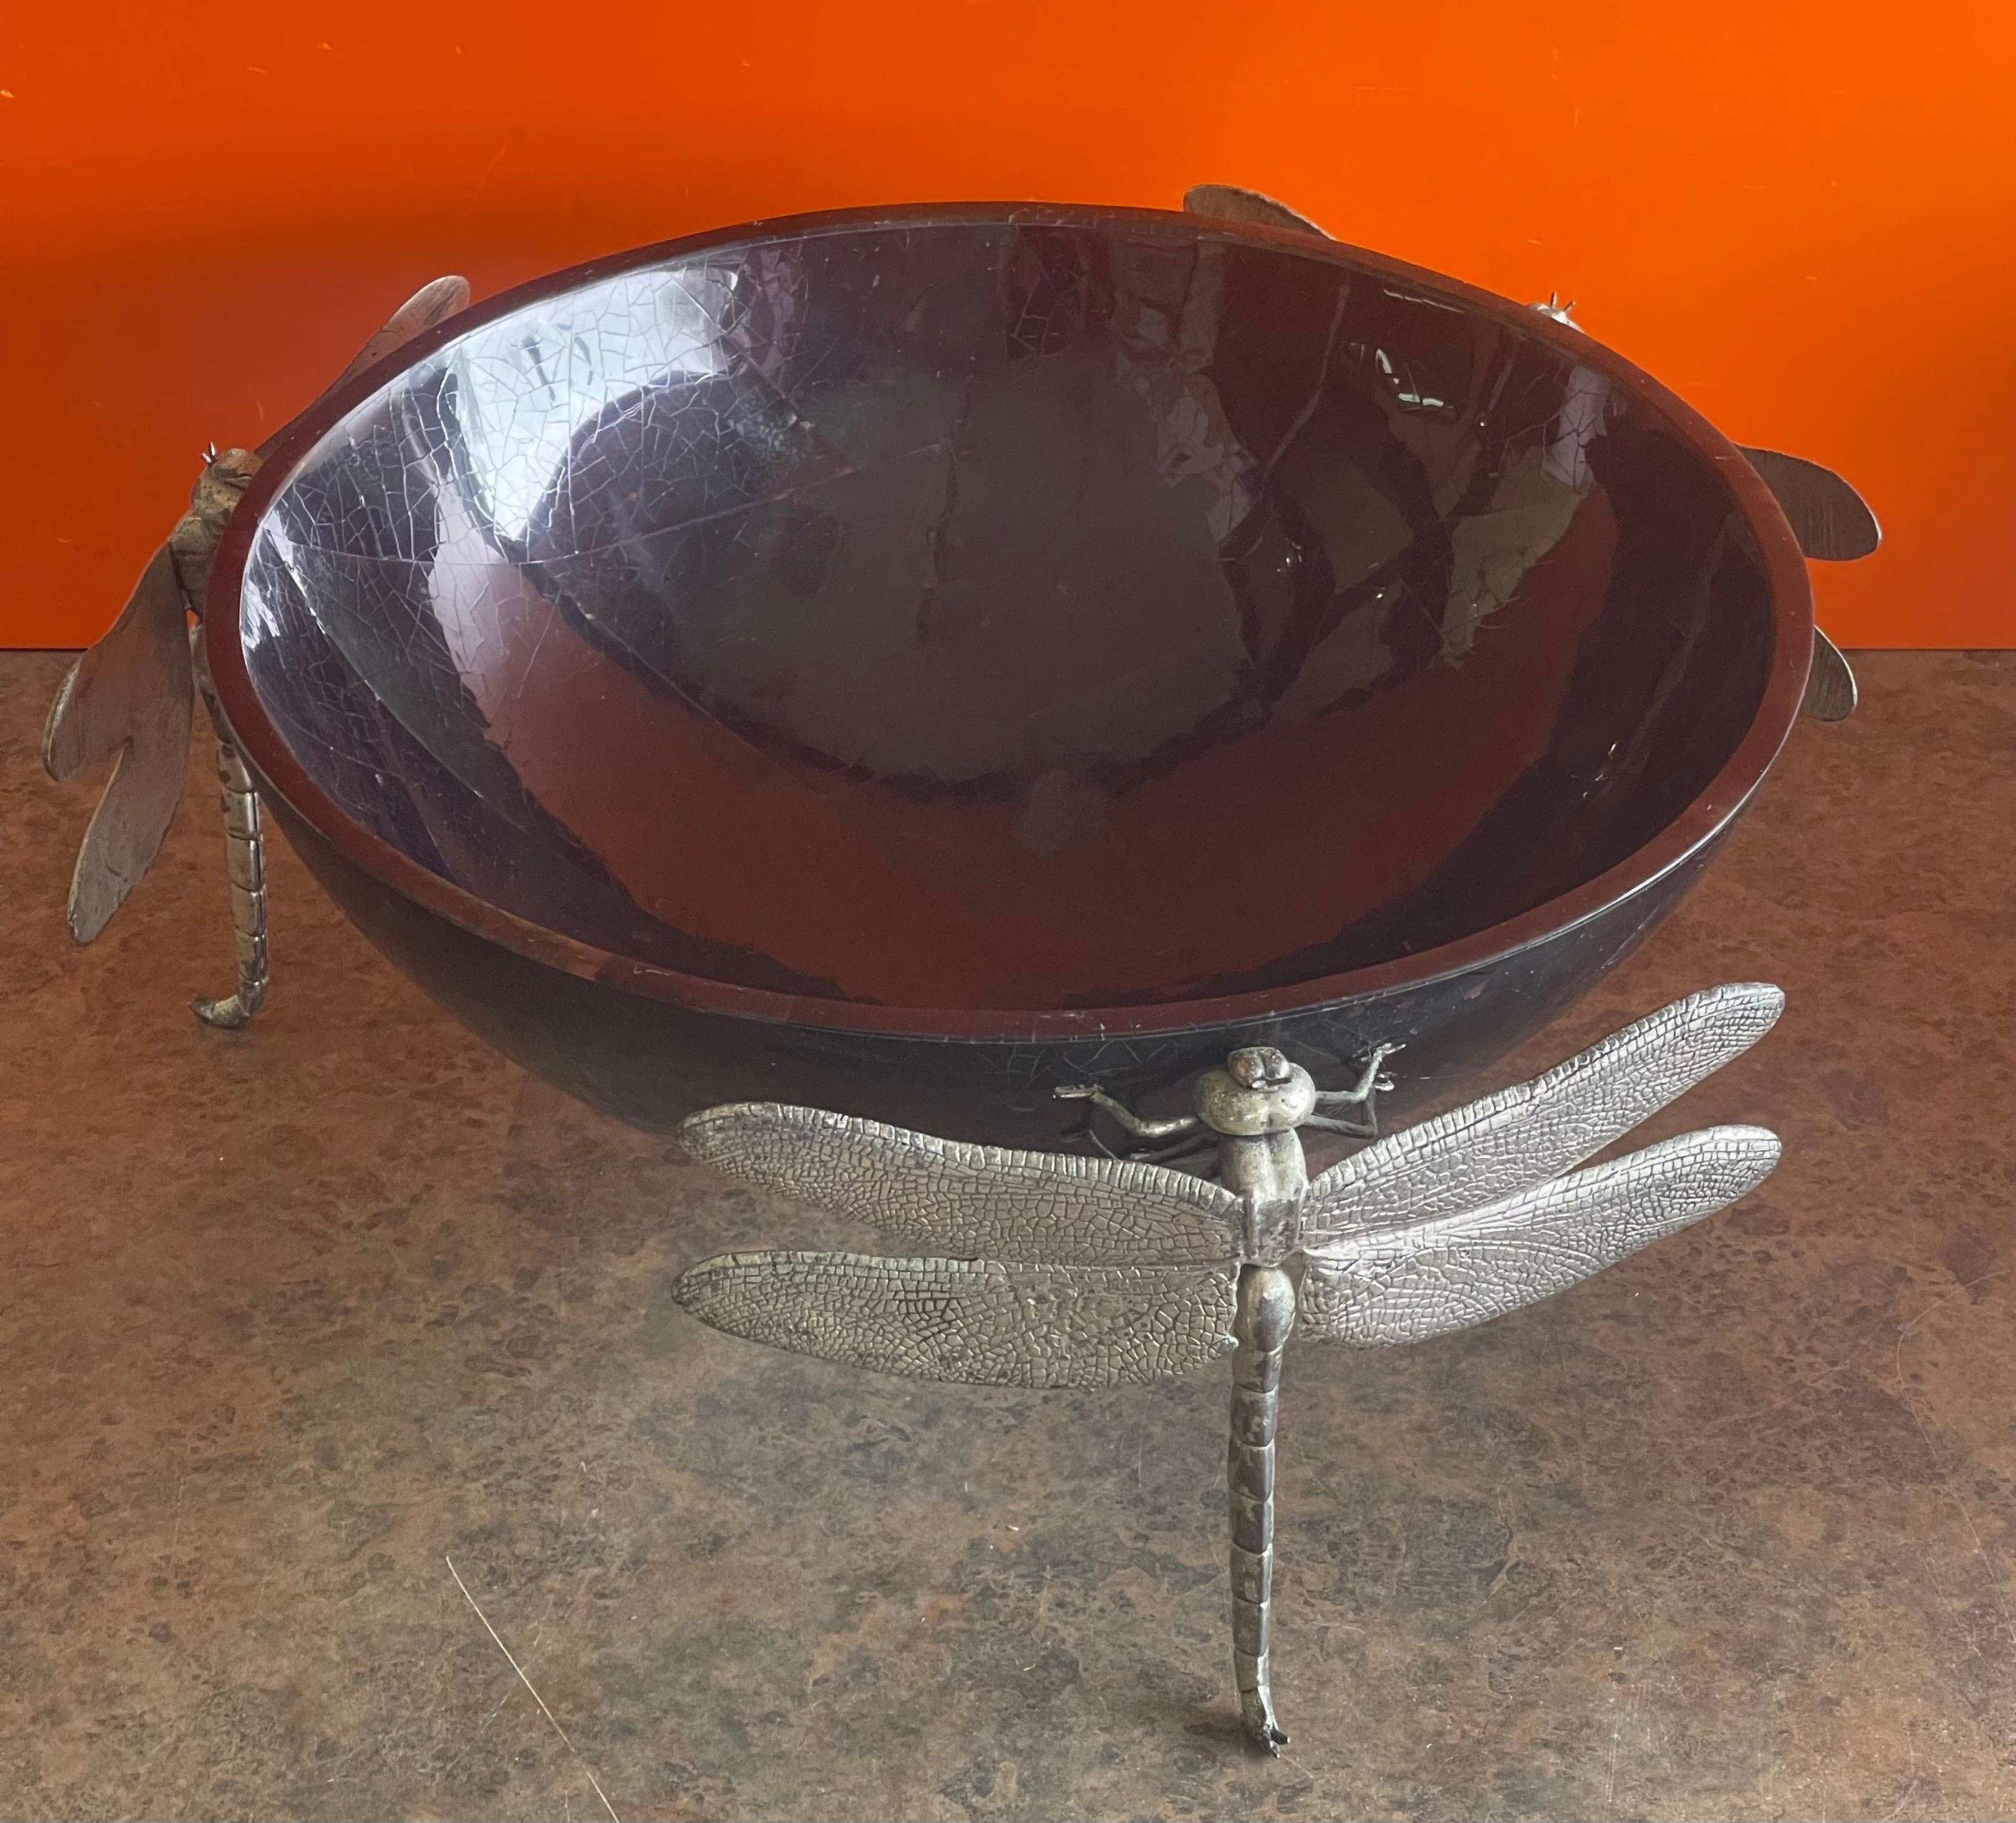 Large Black Pen Shell Centerpiece Bowl with Dragonfly Feet 7